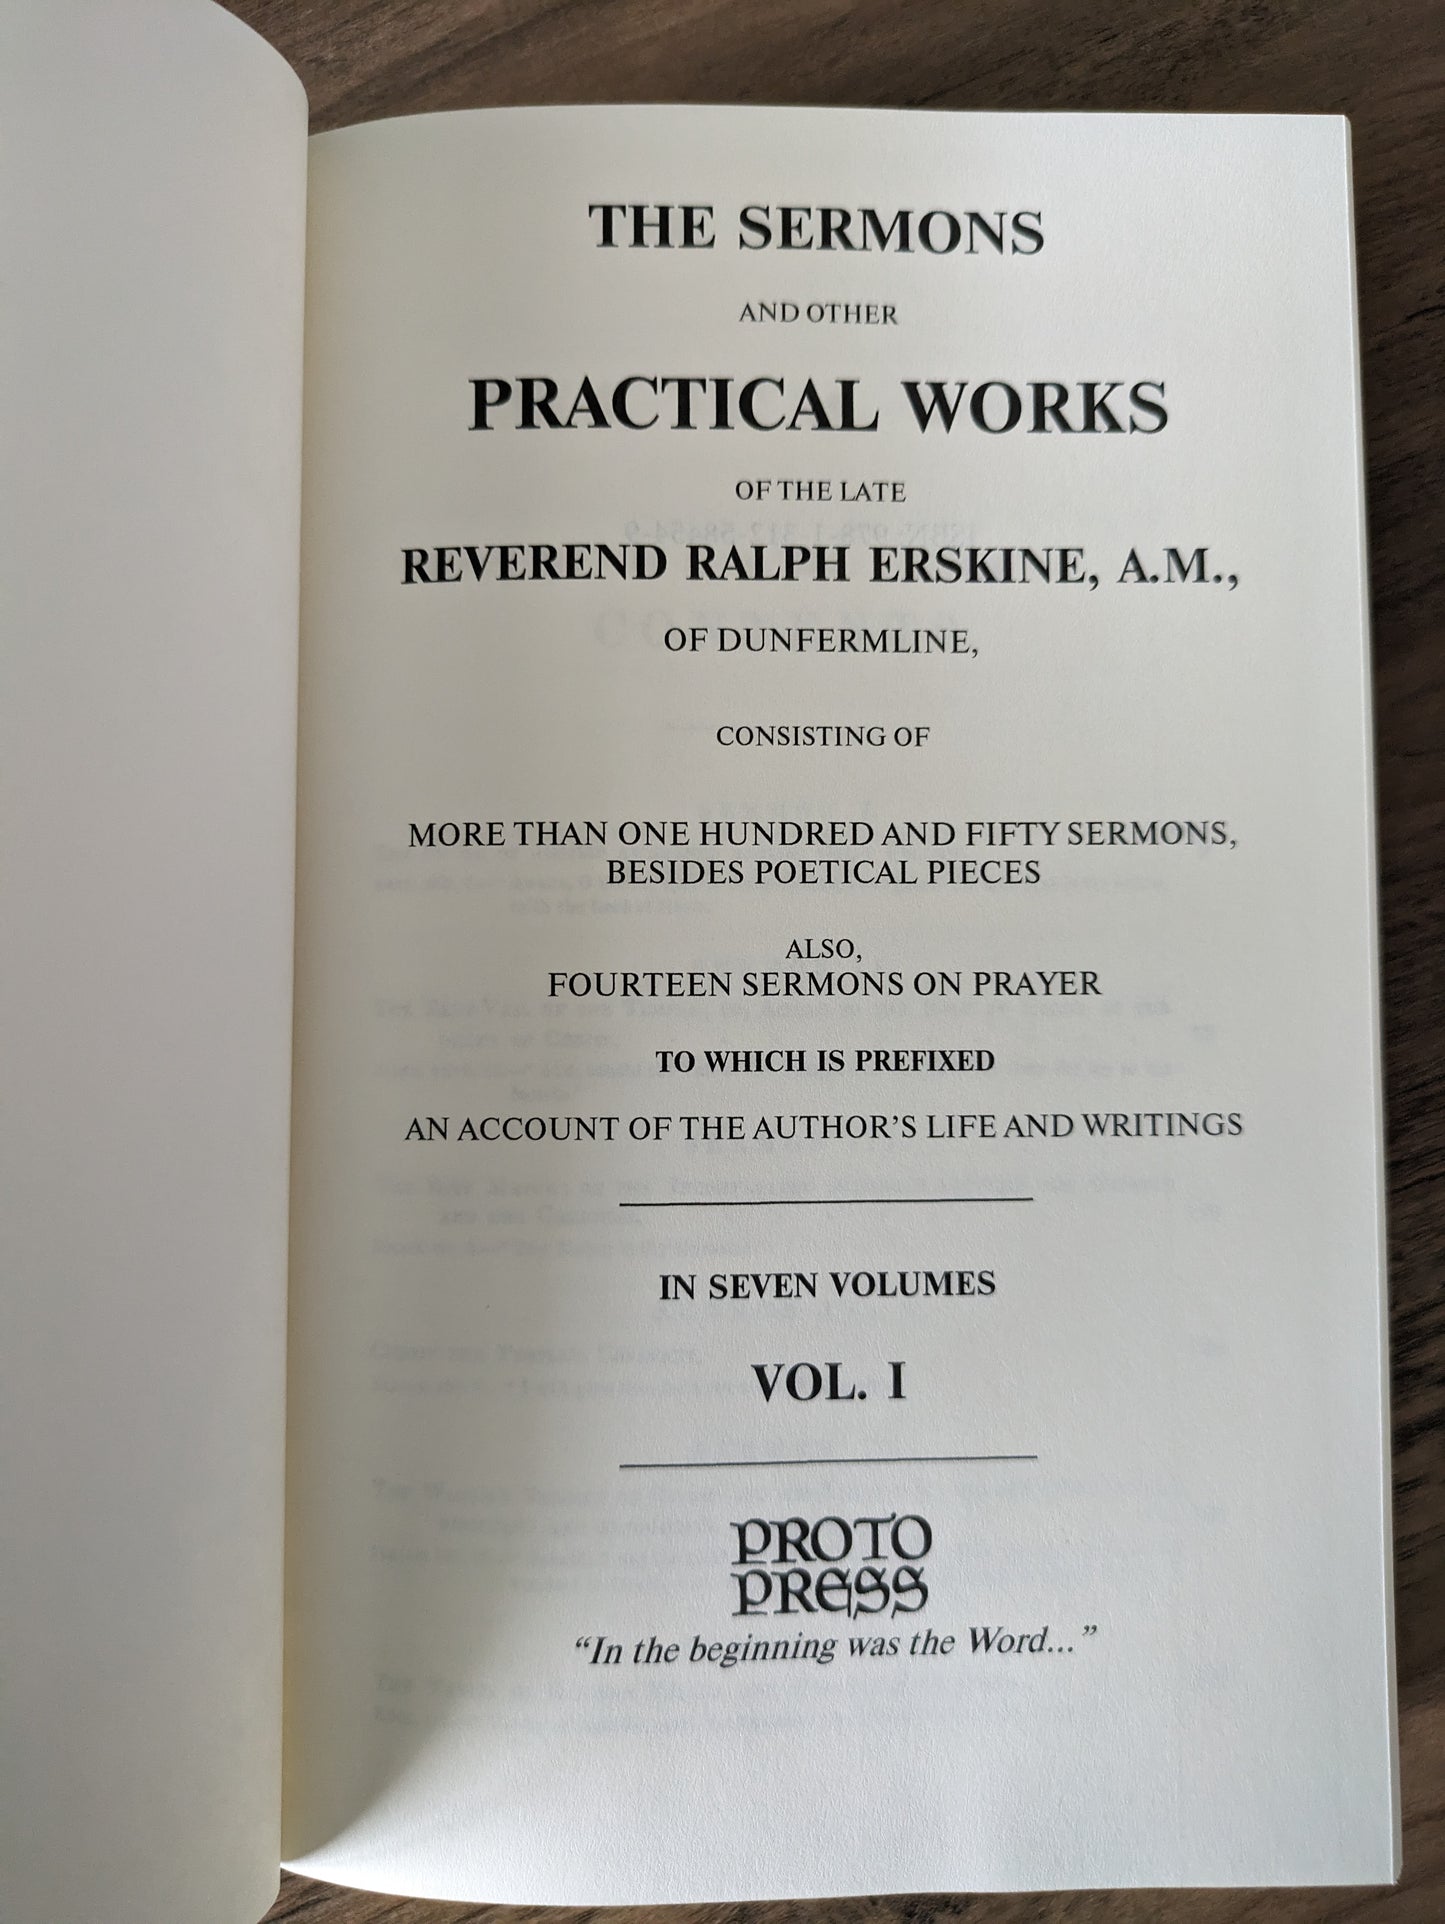 The Works of Ralph Erskine (7 volumes)